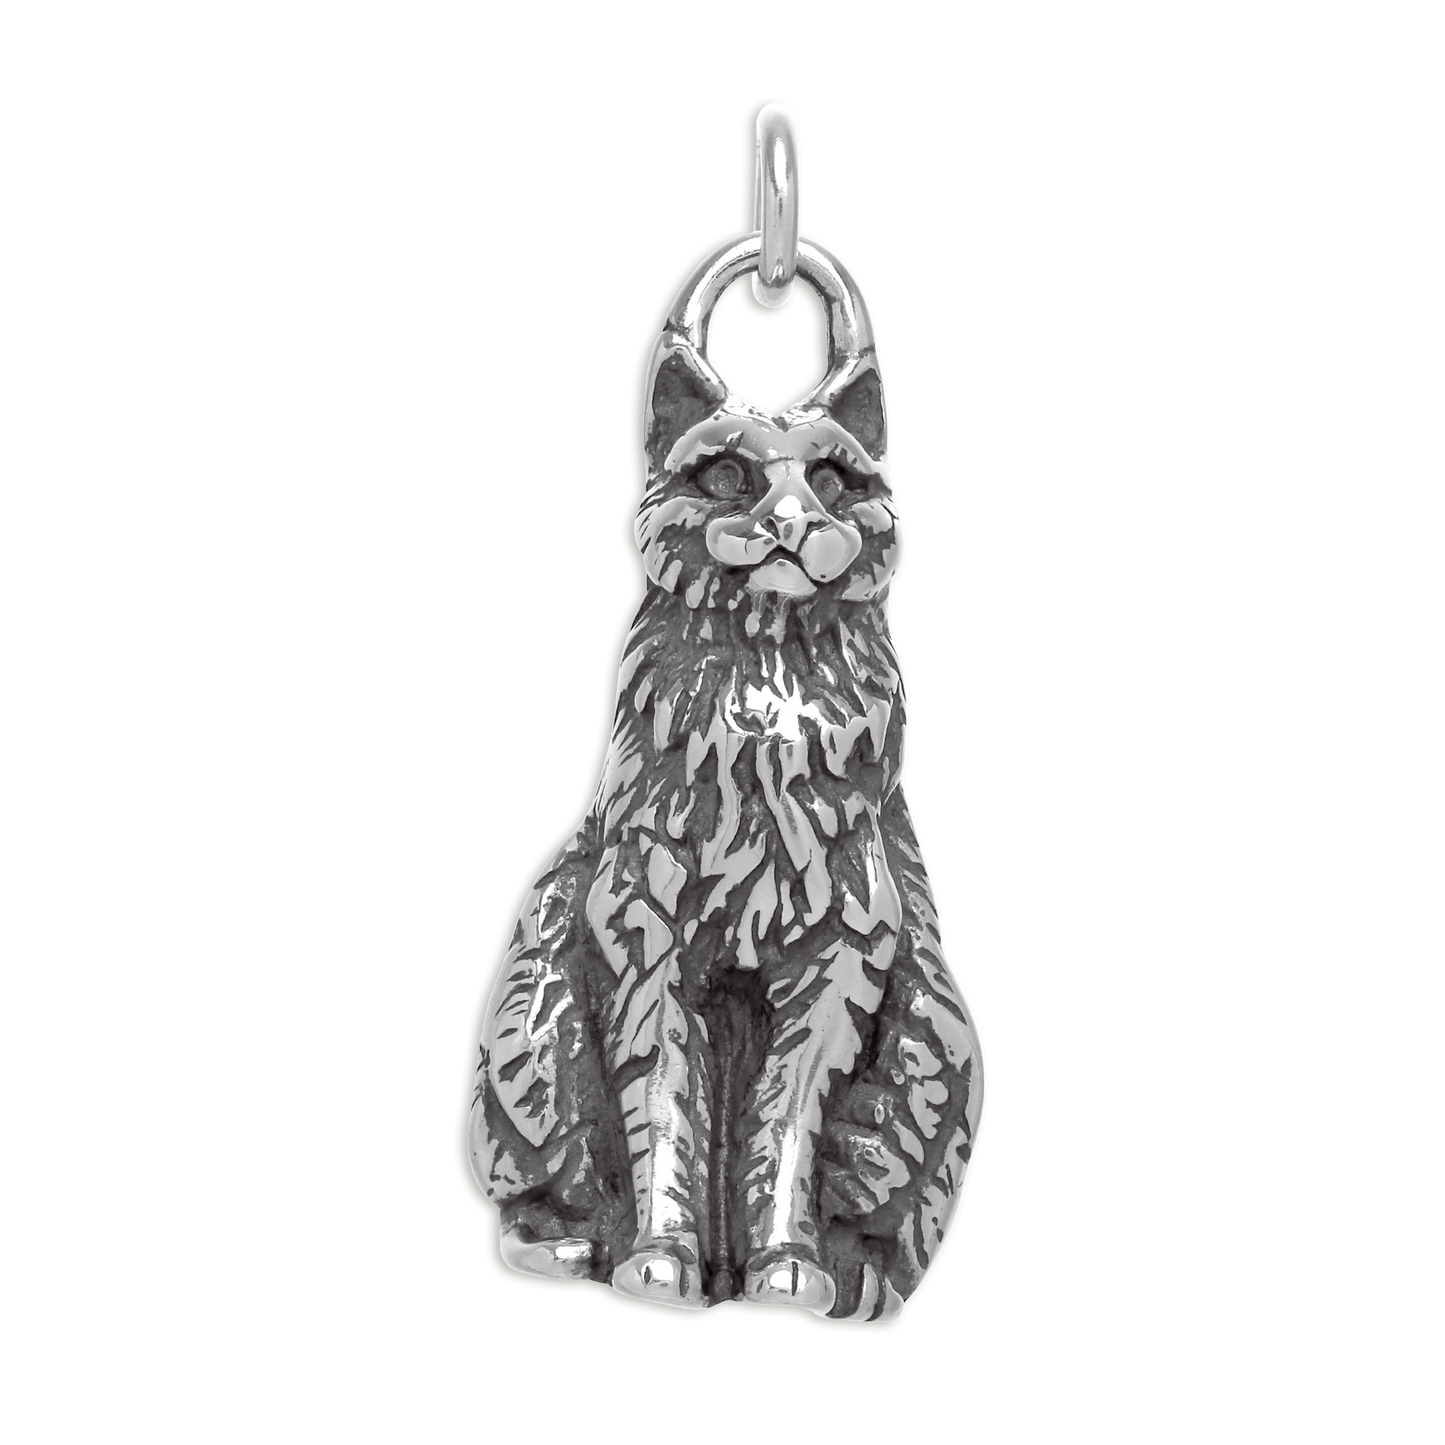 Sterling Silver Sitting Cat Charm